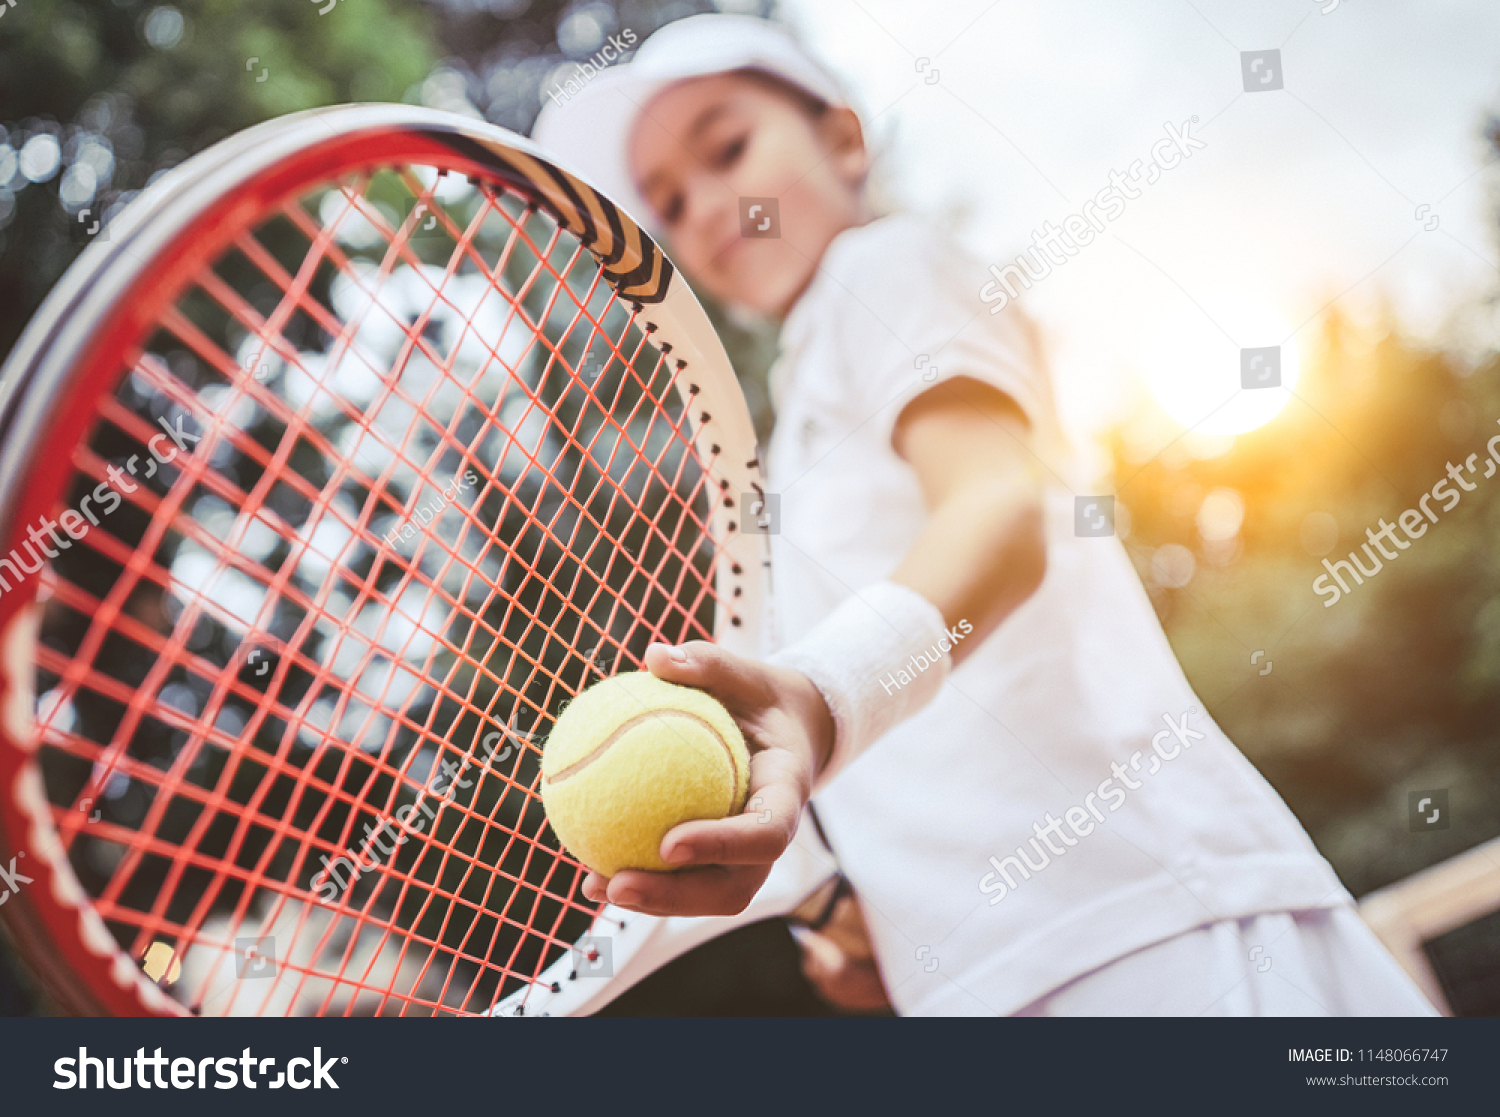 Sporty little girl preparing to serve tennis ball. Close up of beautiful yong girl holding tennis ball and racket. Child tennis player preparing to serve. #1148066747